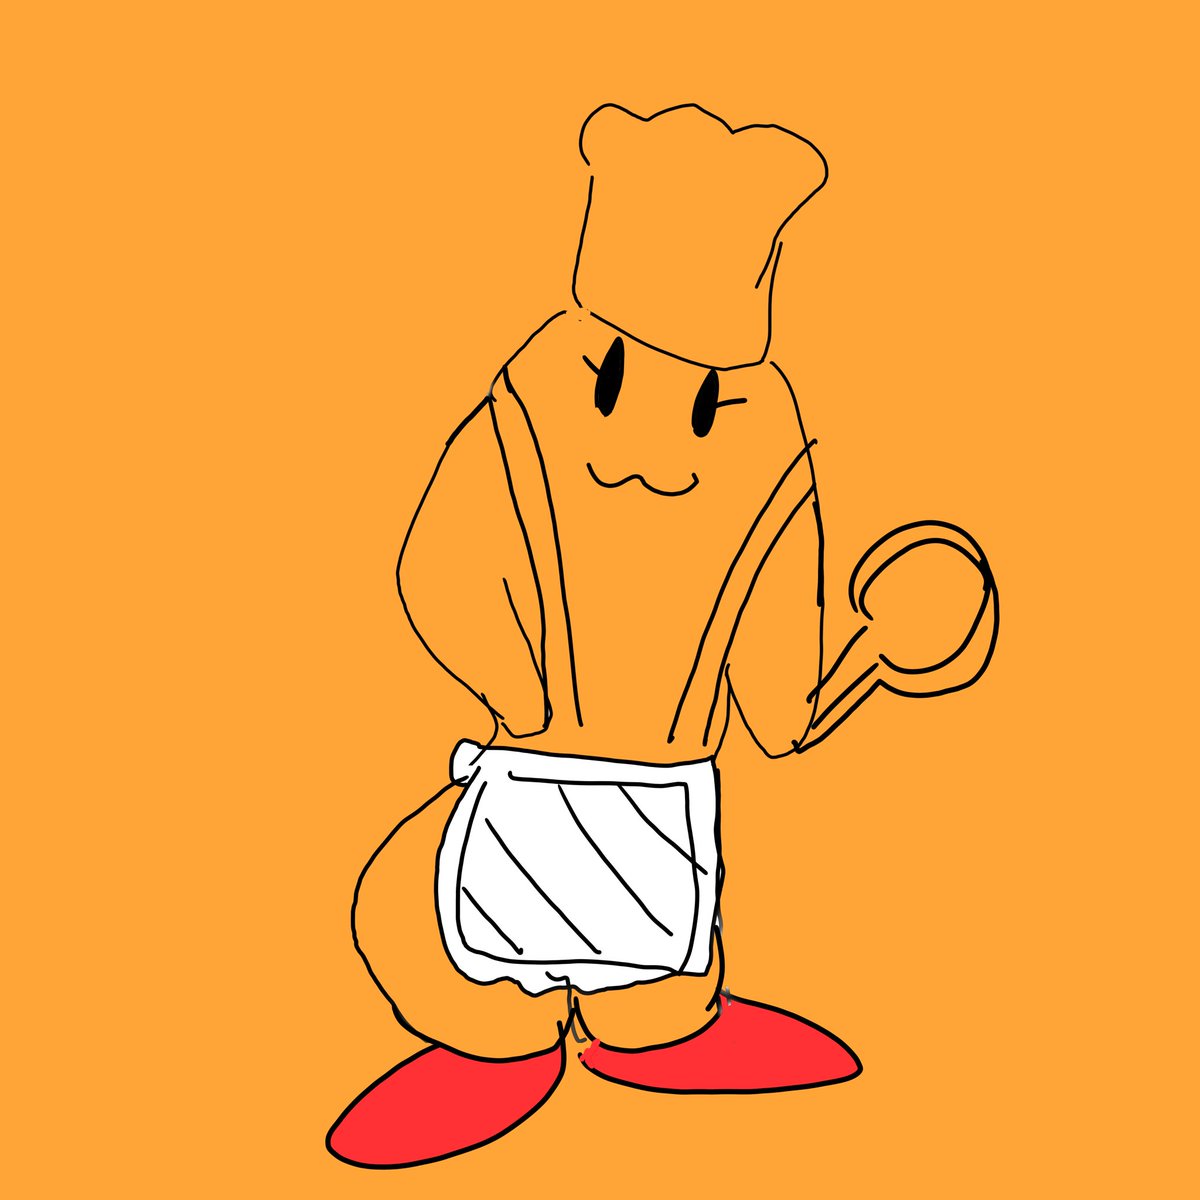 chef hat solo apron simple background hat :3 standing  illustration images